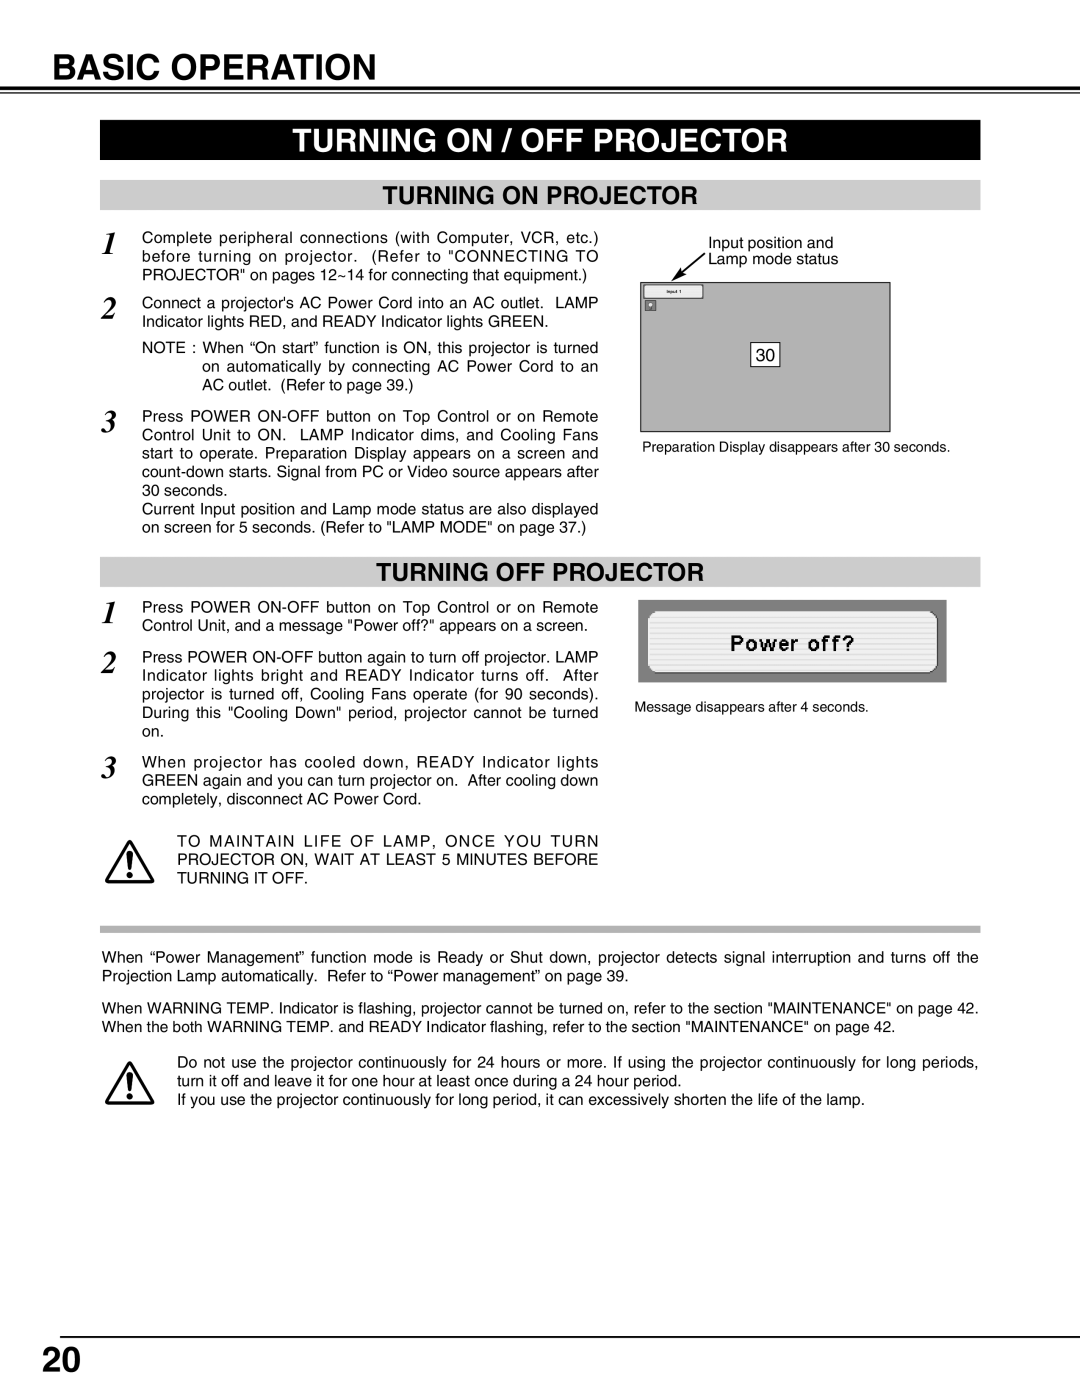 Sanyo PLC-XP55L owner manual Basic Operation, Turning On / Off Projector 